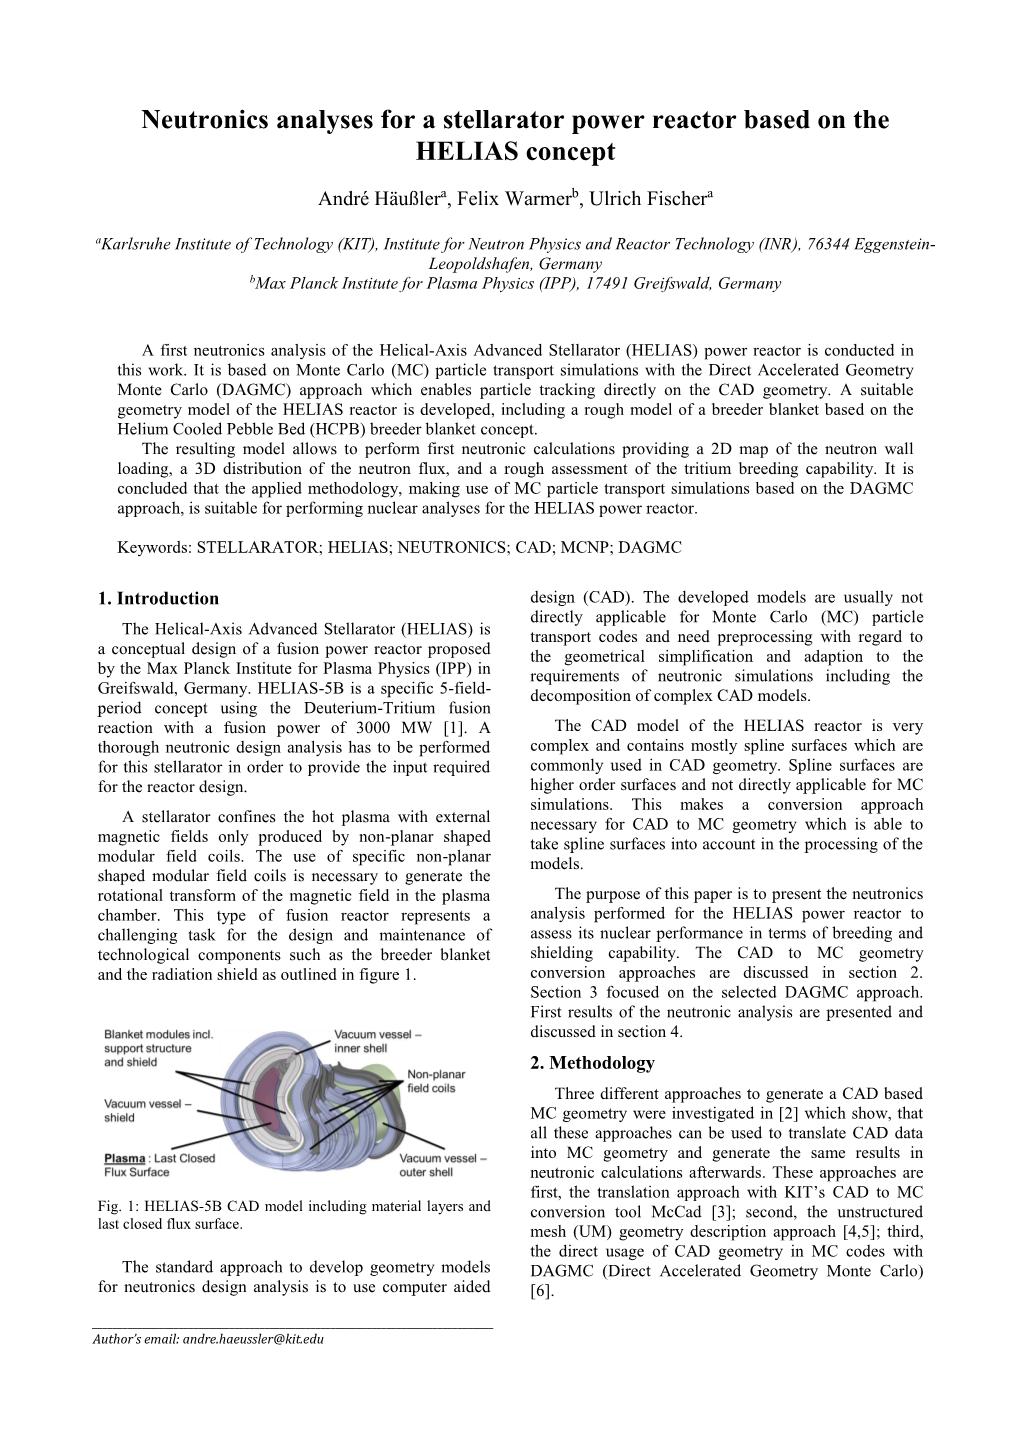 Neutronics Analyses for a Stellarator Power Reactor Based on the HELIAS Concept